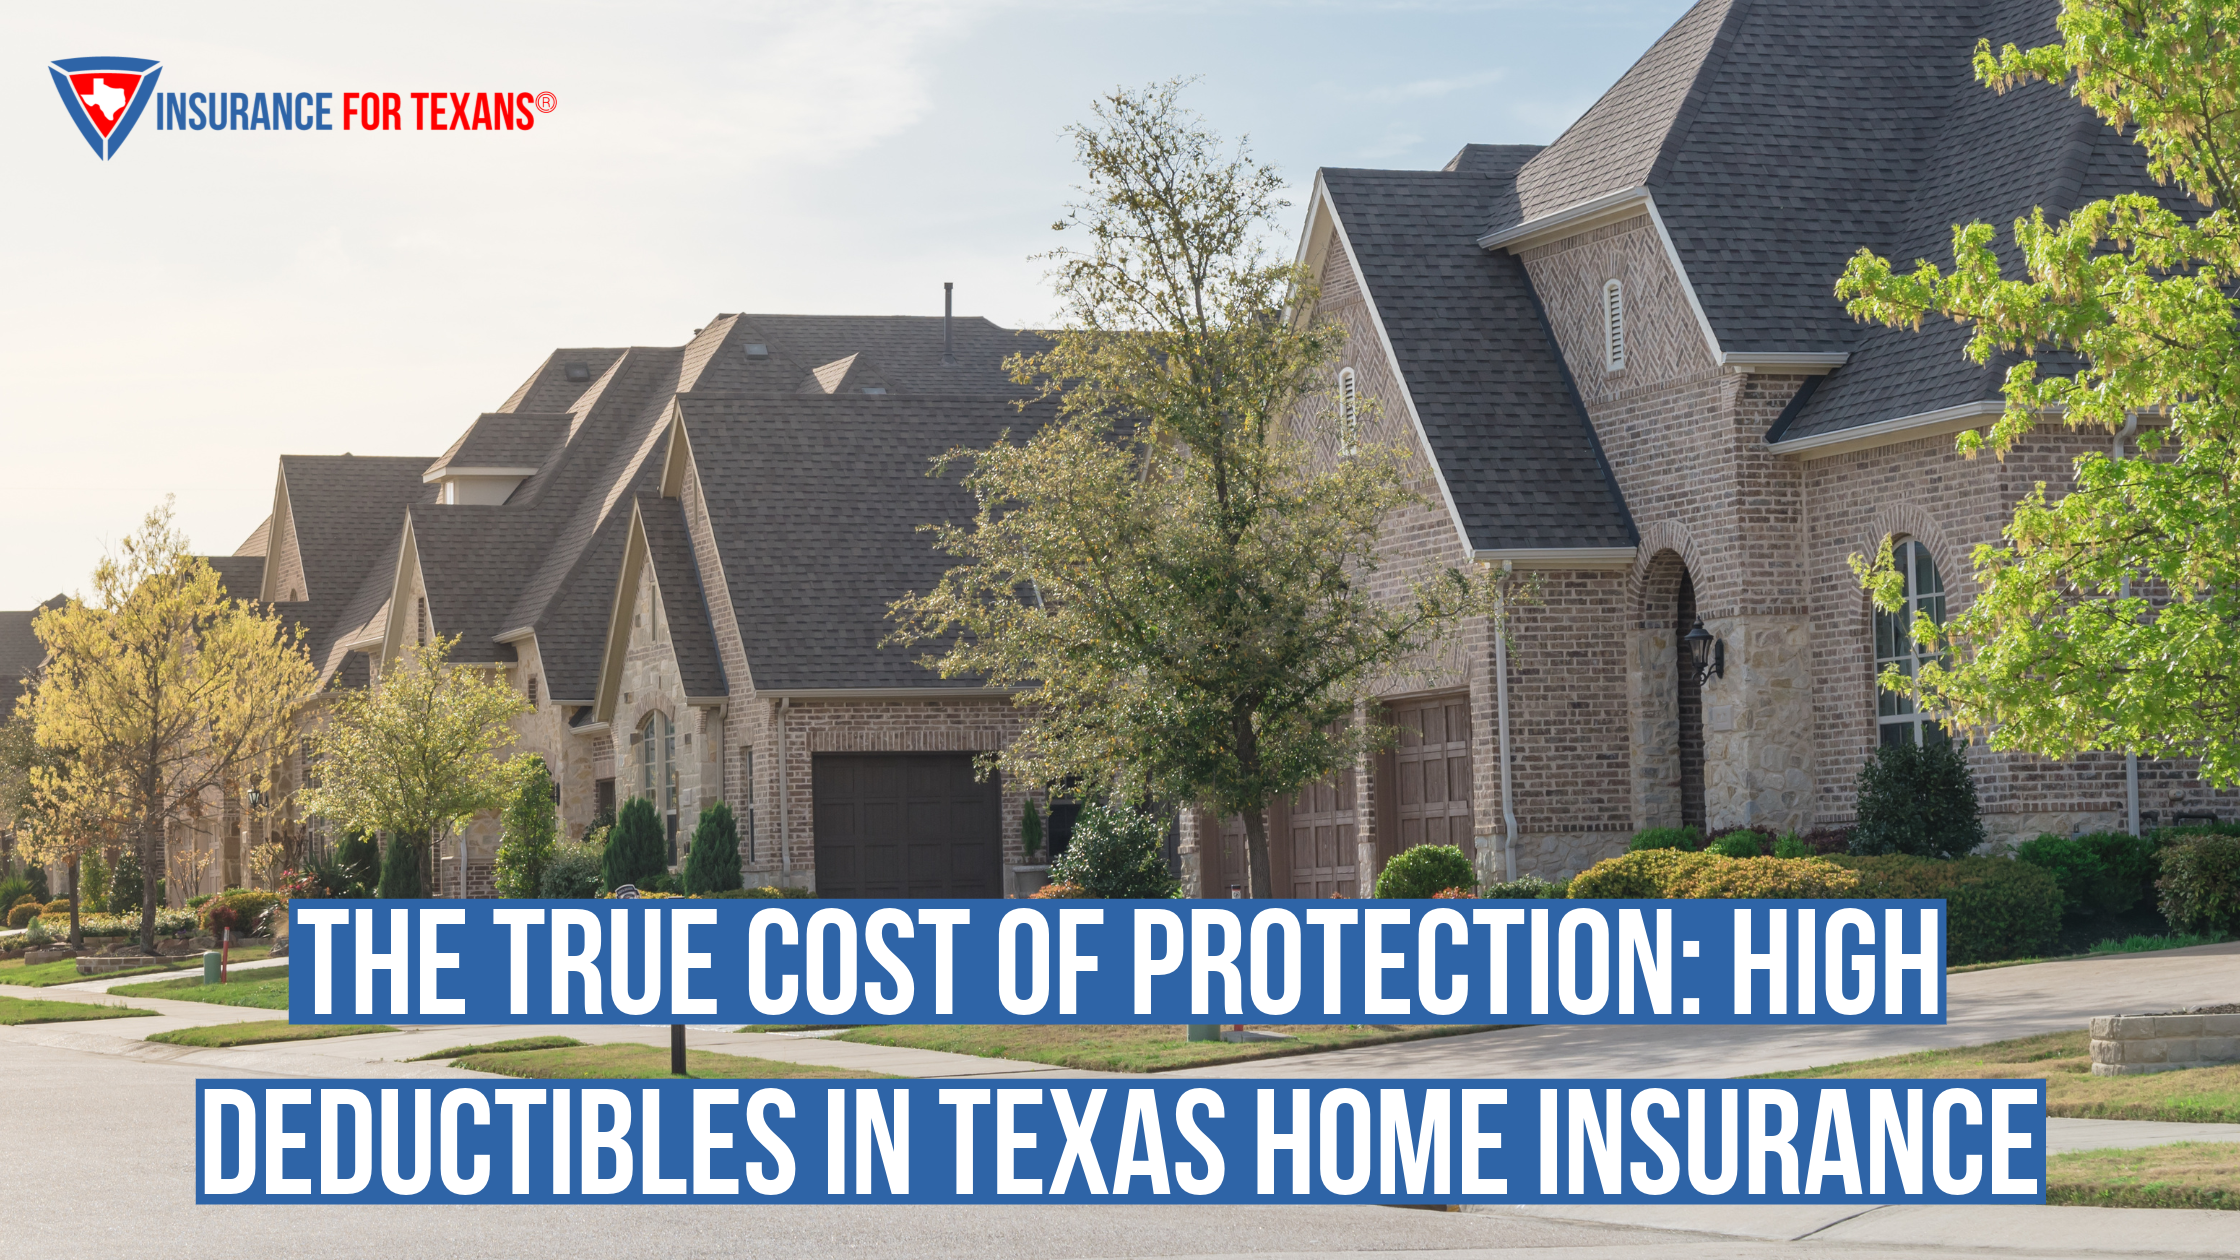 The True Cost of Protection: High Deductibles in Texas Home Insurance